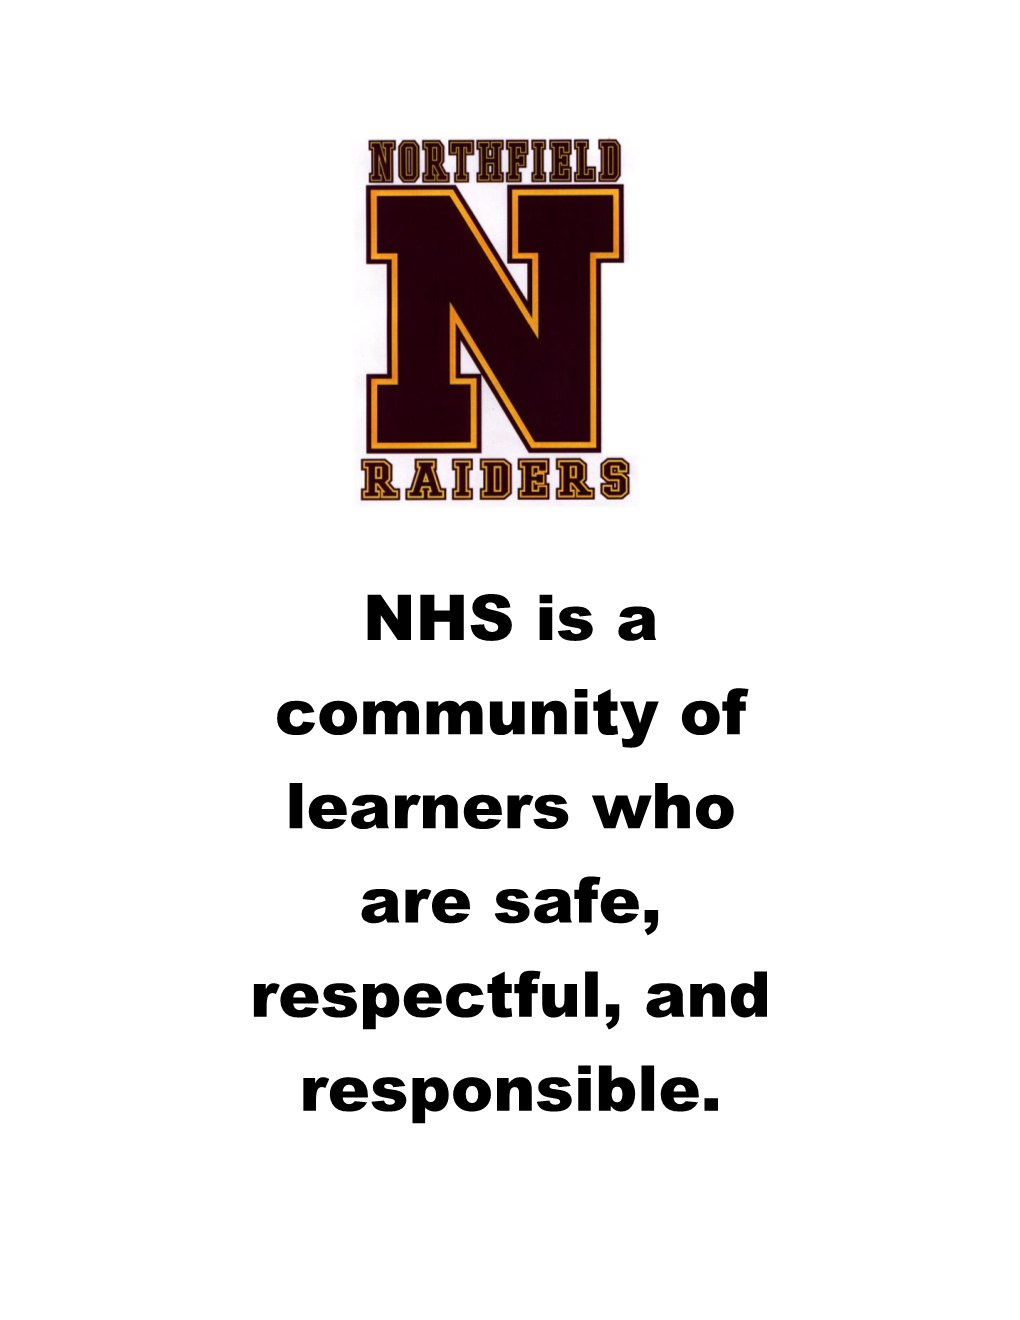 NHS Is a Community of Learners Who Are Safe, Respectful, and Responsible